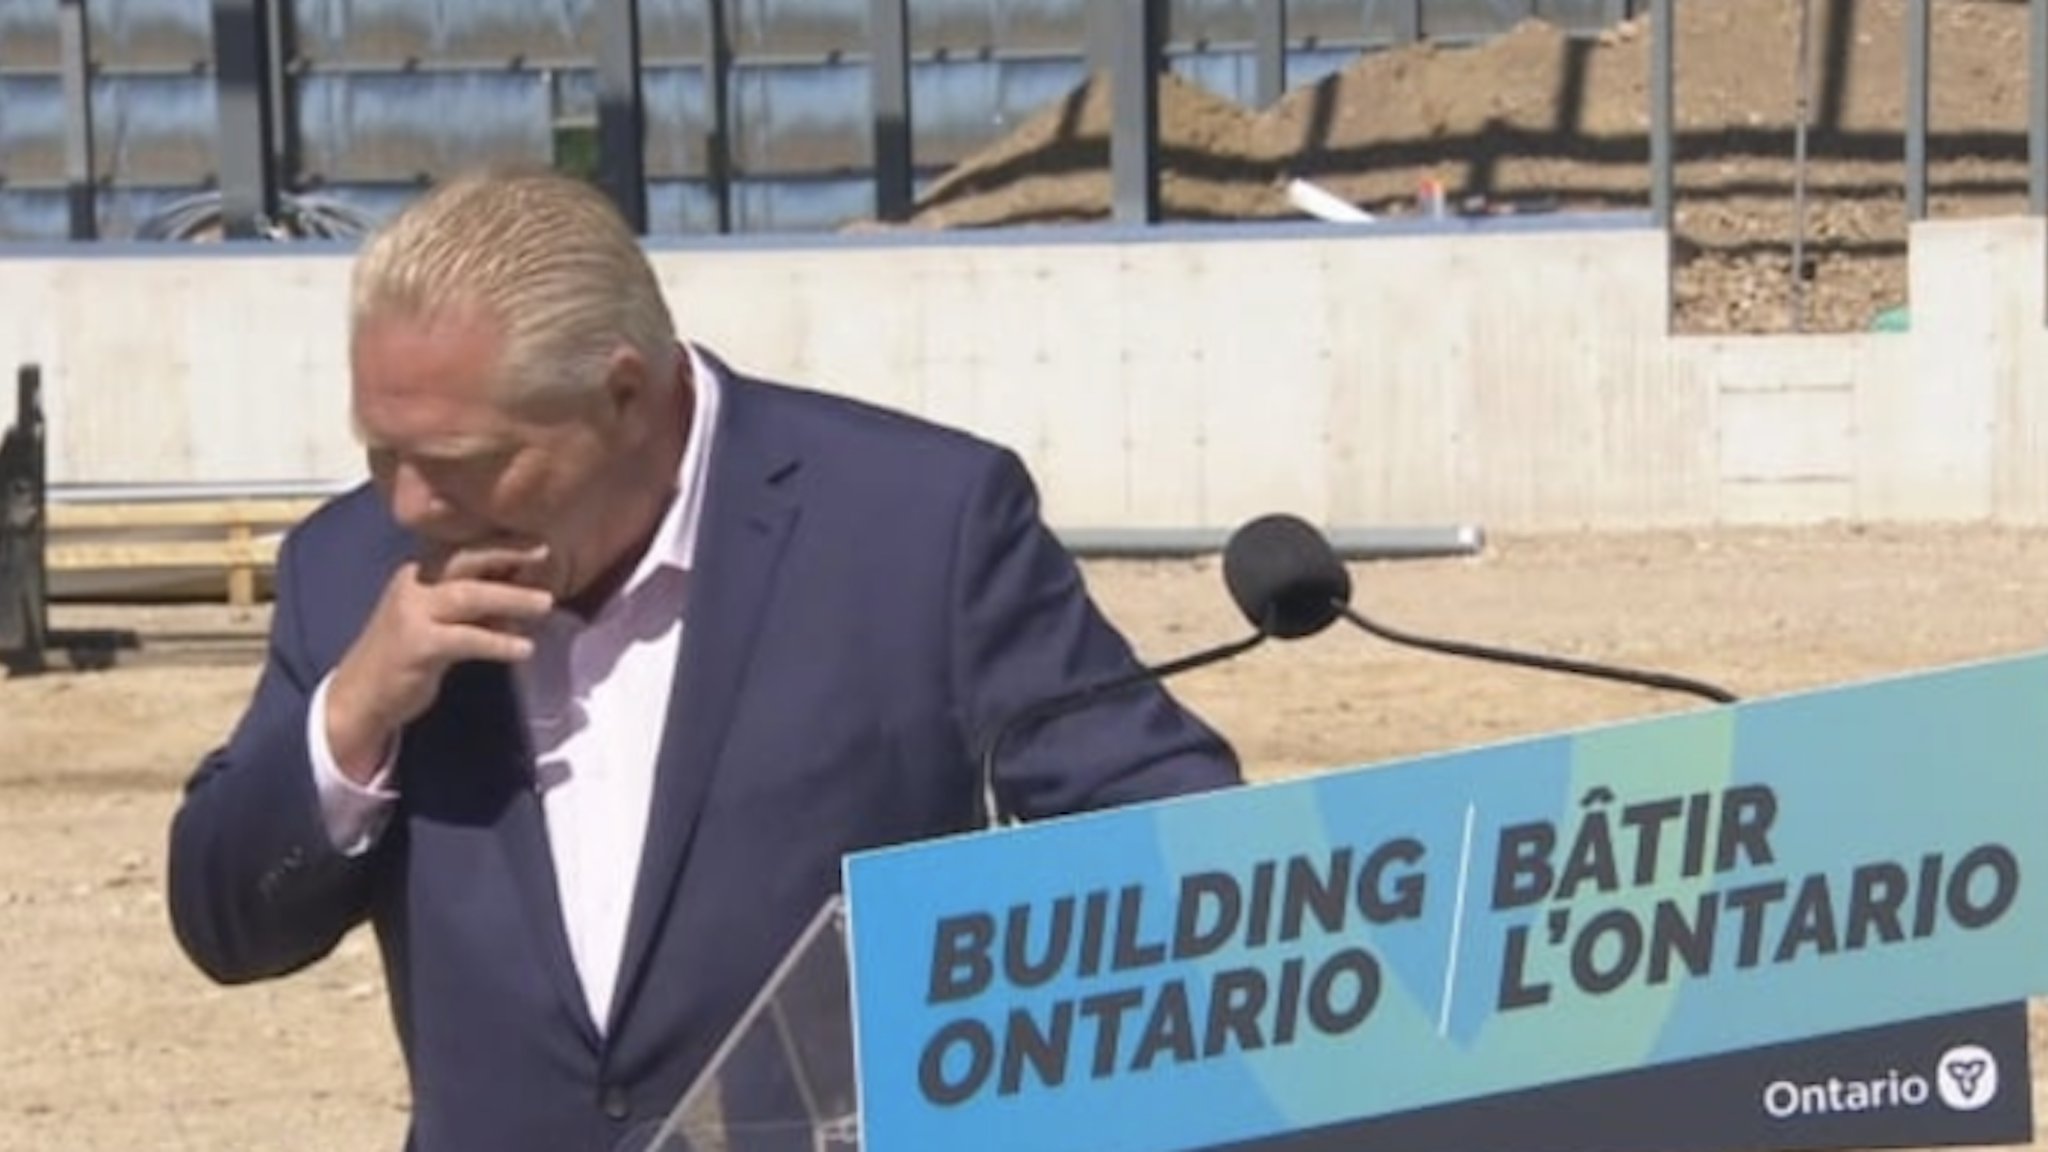 Ontario Premier Doug Ford swallowed a bee while speaking to reporters